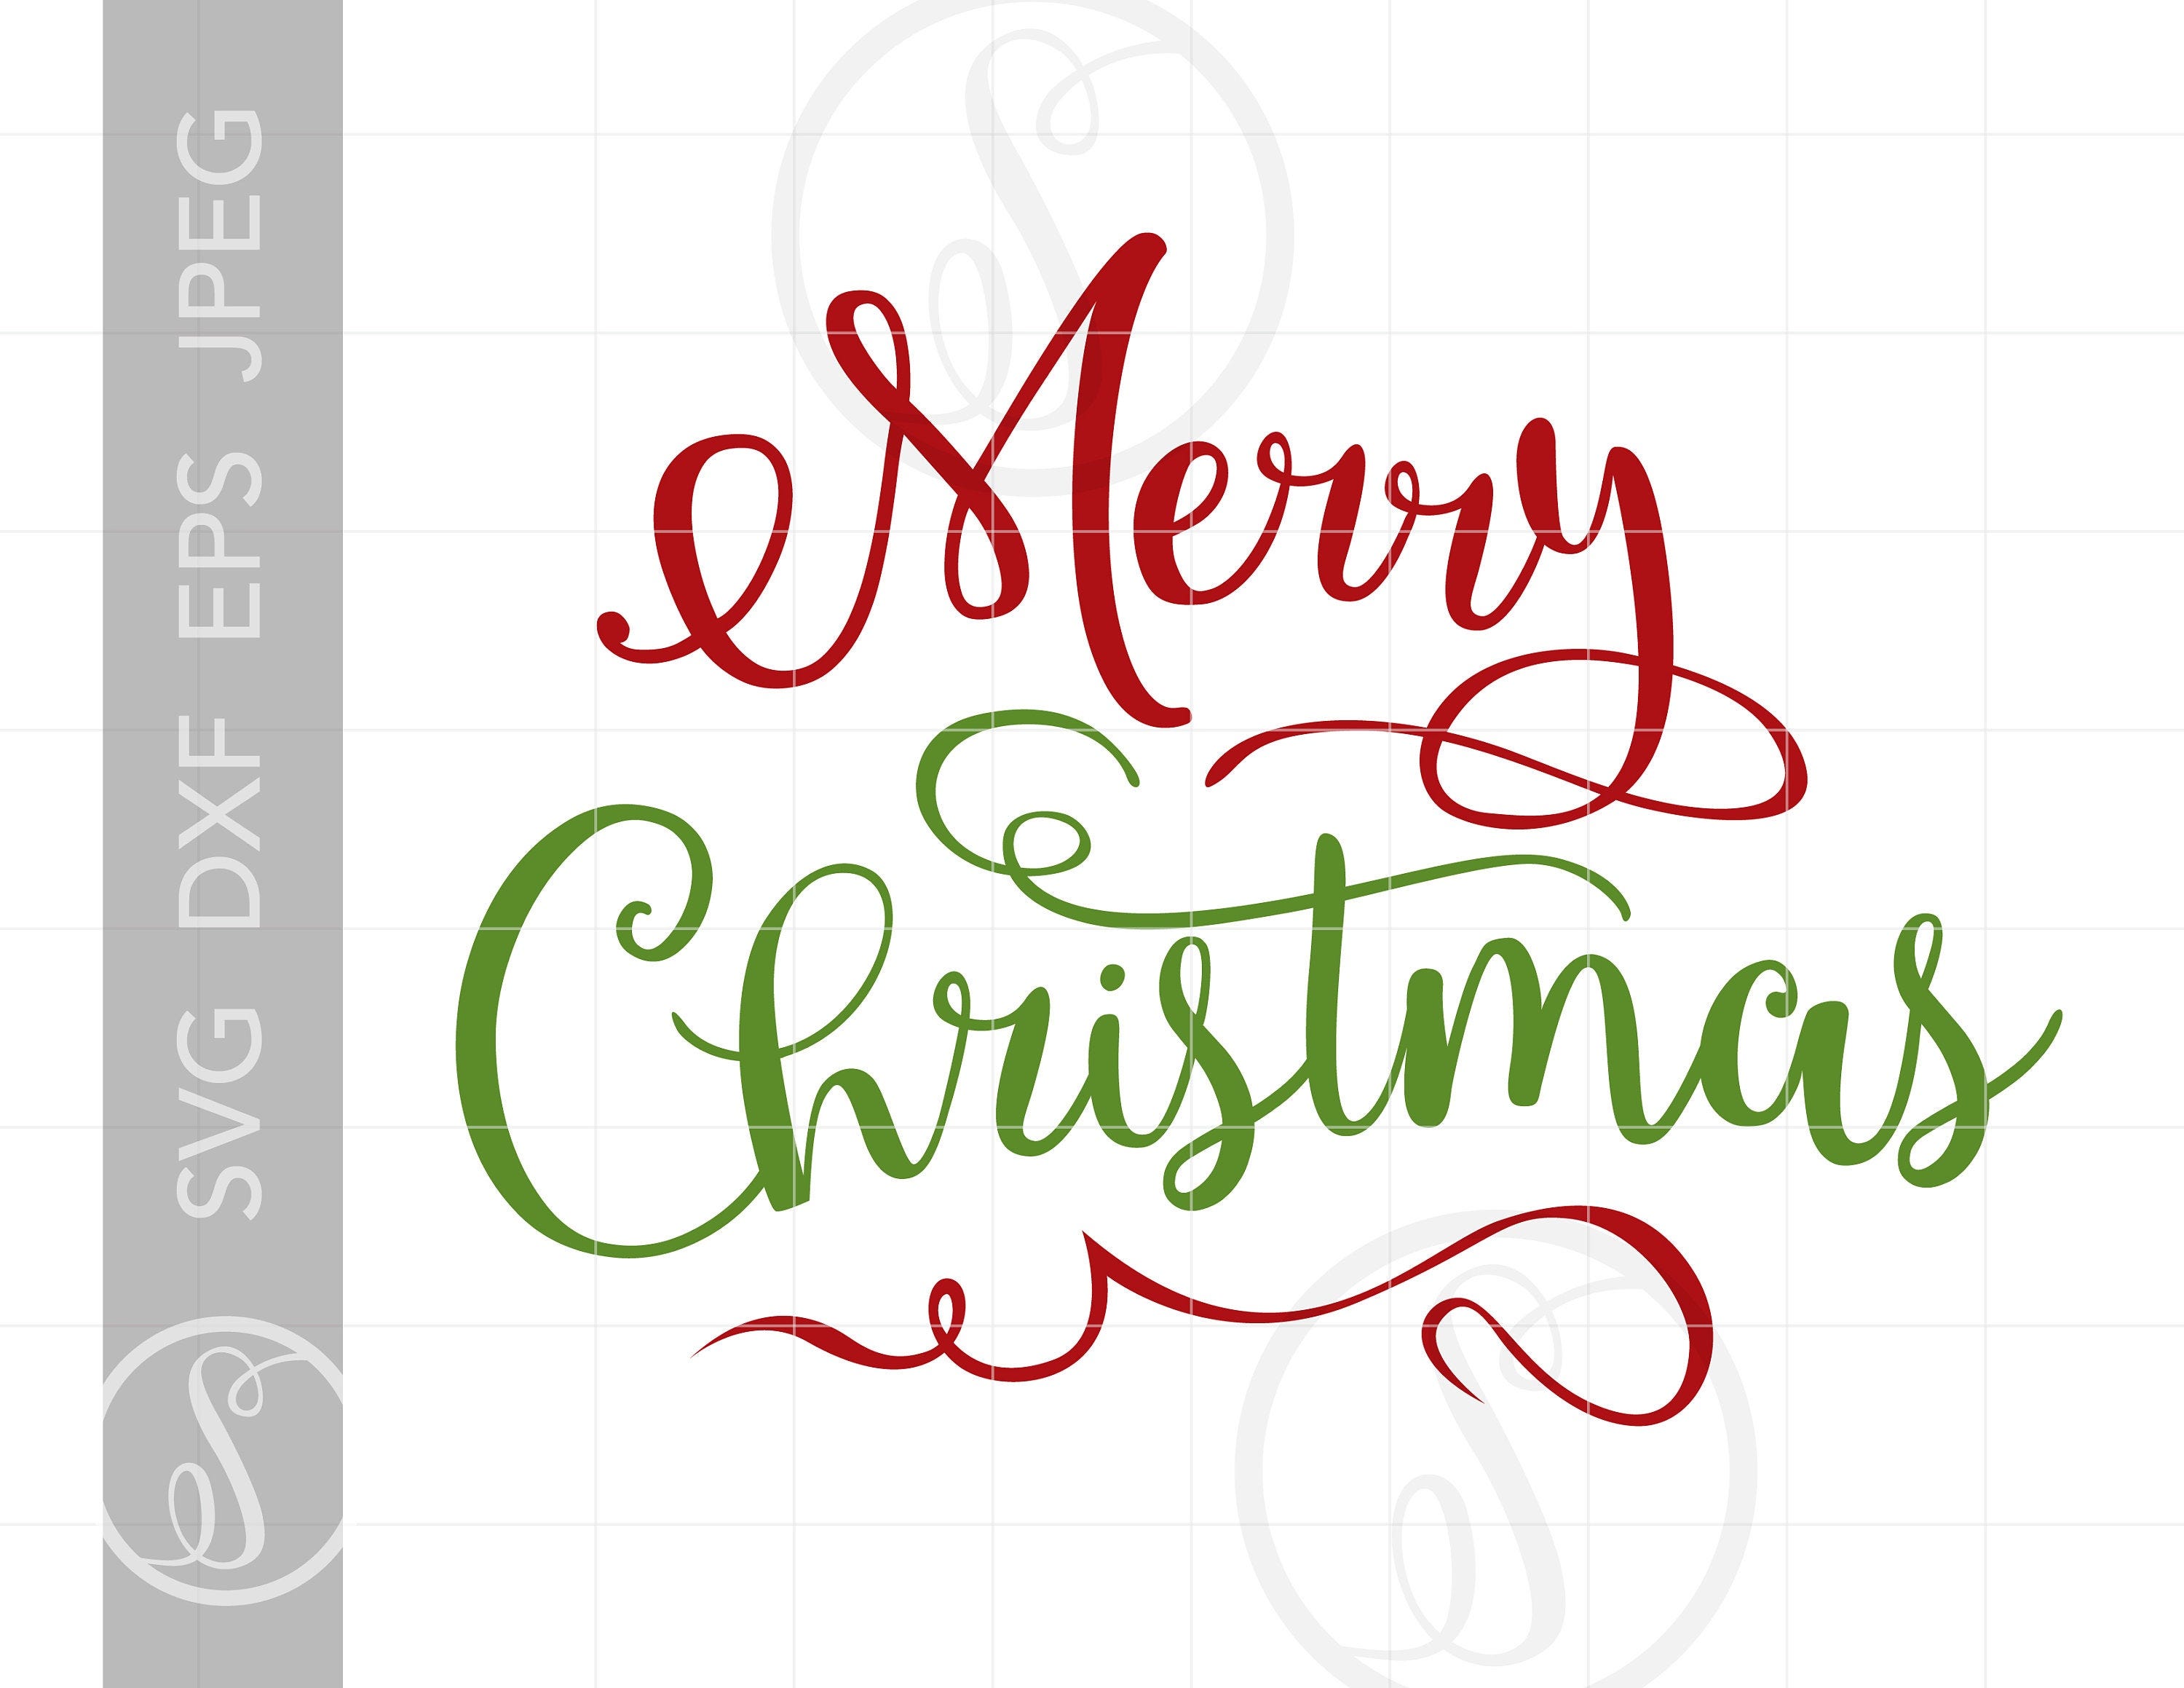 Merry Christmas Script SVG | Vector Merry Christmas Silhouette Cut File | Merry Christmas Svg Jpg Eps Pdf Png DXF Download SC1040